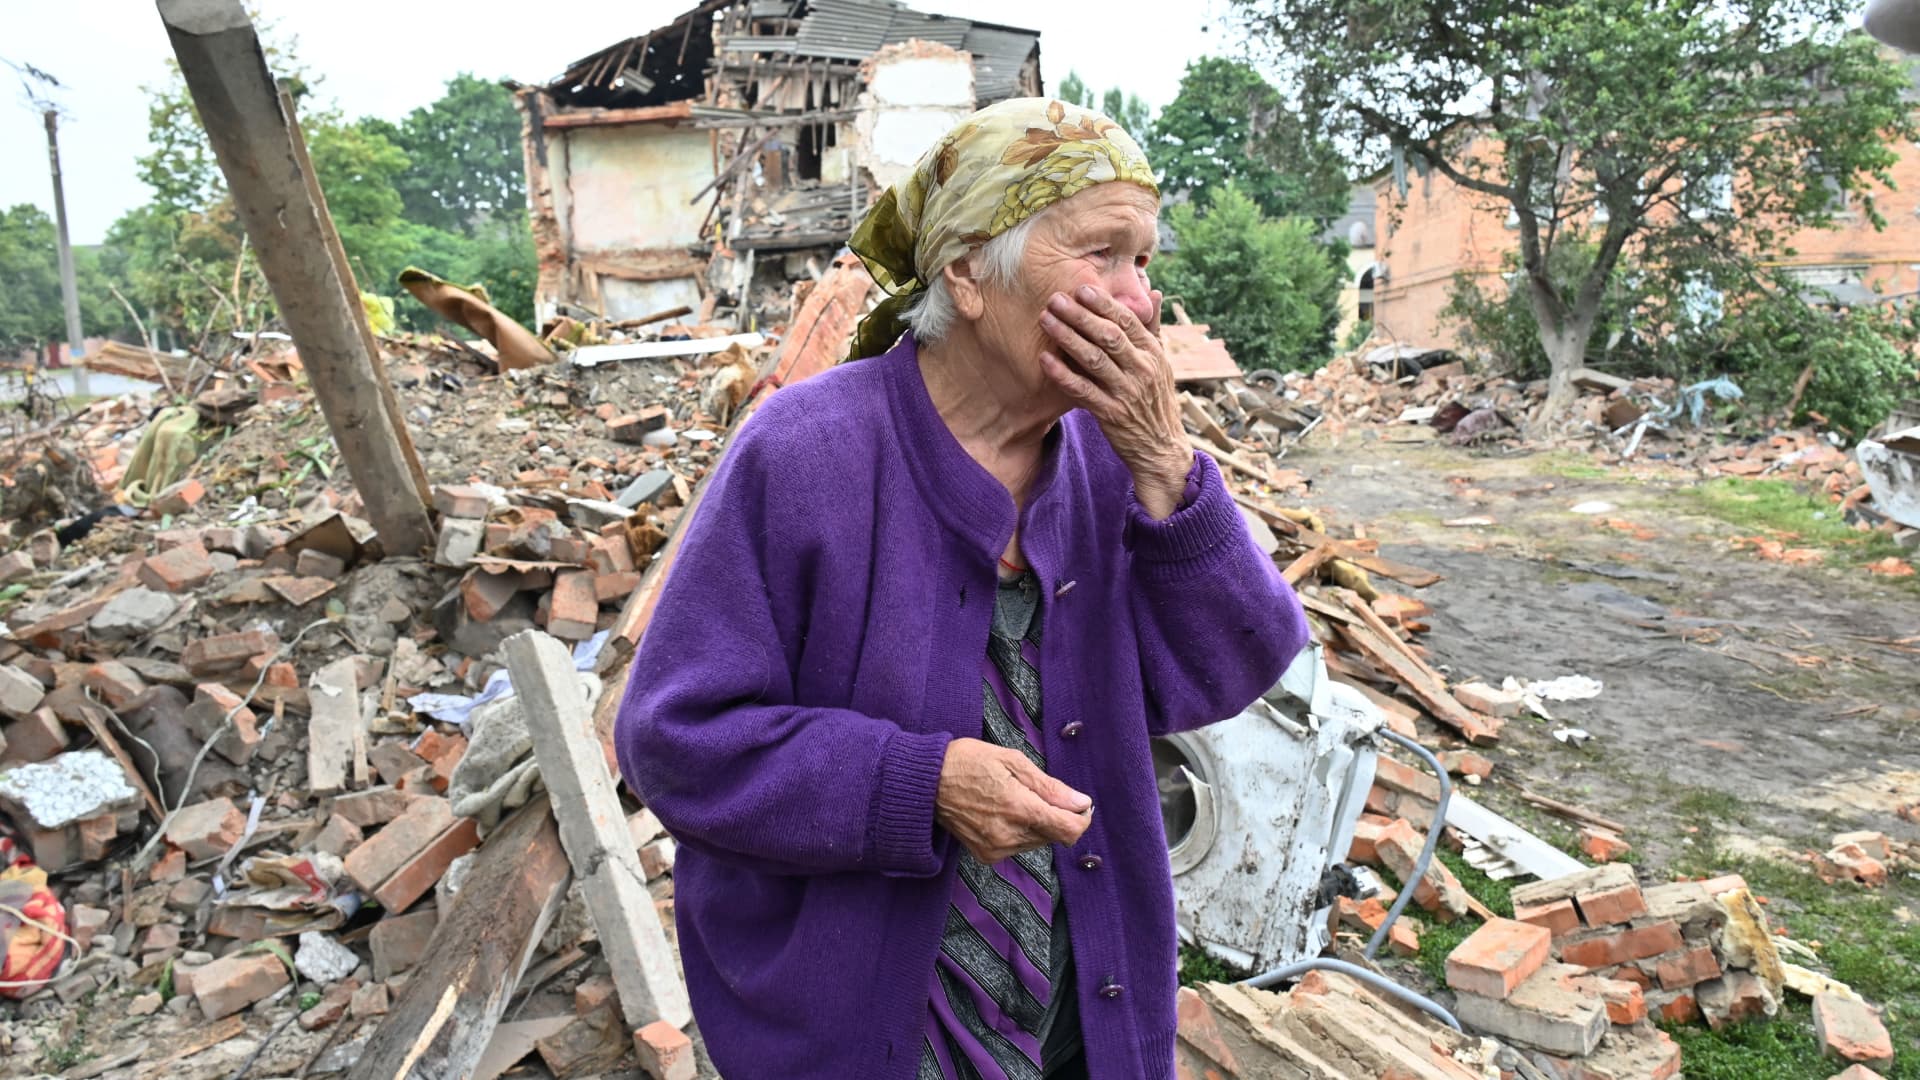 A local resident, Raisa Kuval, 82, reacts next to a damaged building partially destroyed after a shelling in the city of Chuguiv, east of Kharkiv, on July 16, 2022.